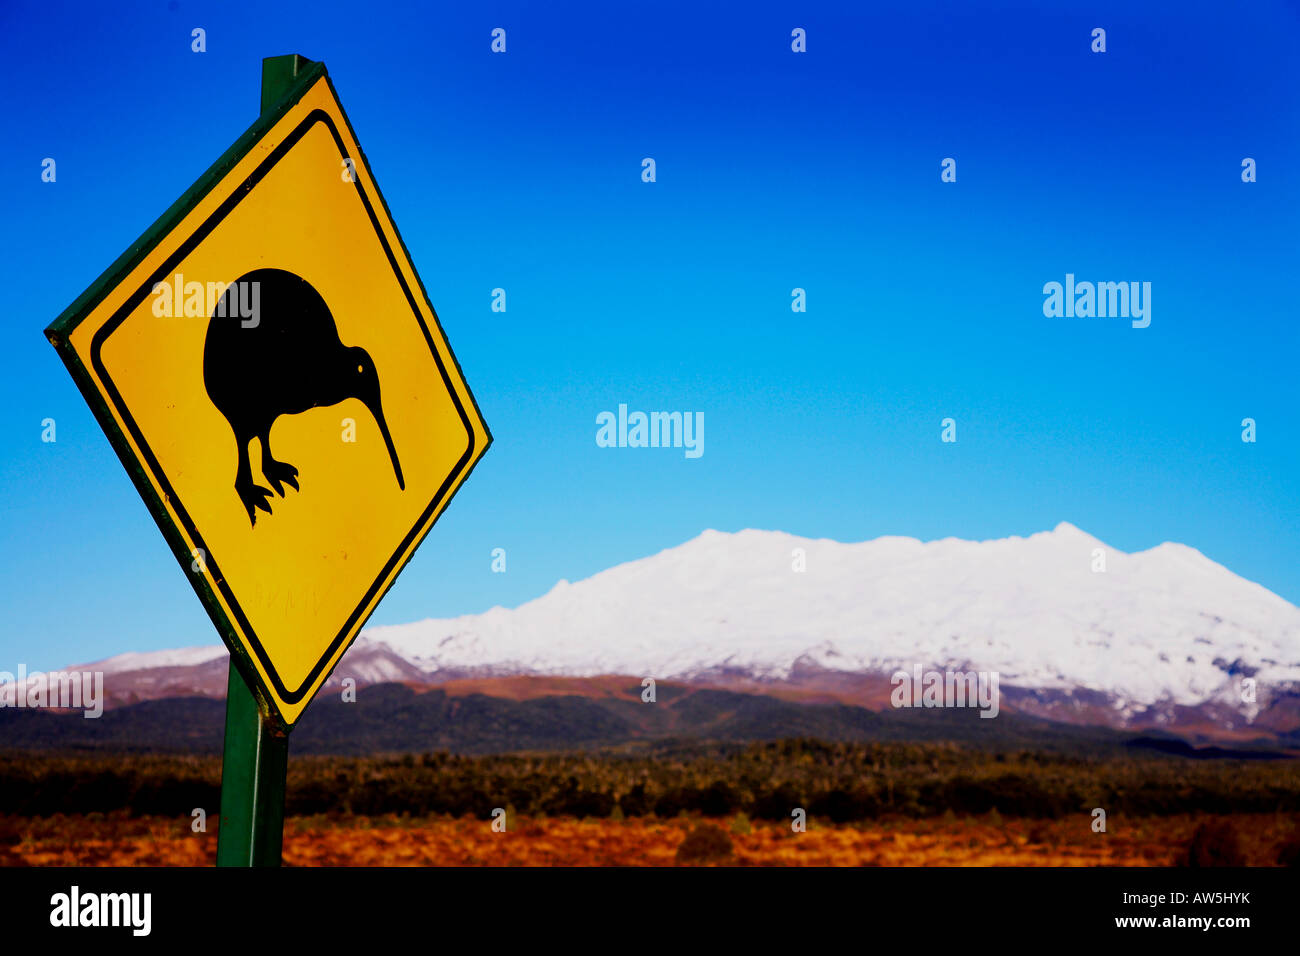 Kiwi traffic sign with mount Ngauruhoe in the background at Tongariro national park Stock Photo